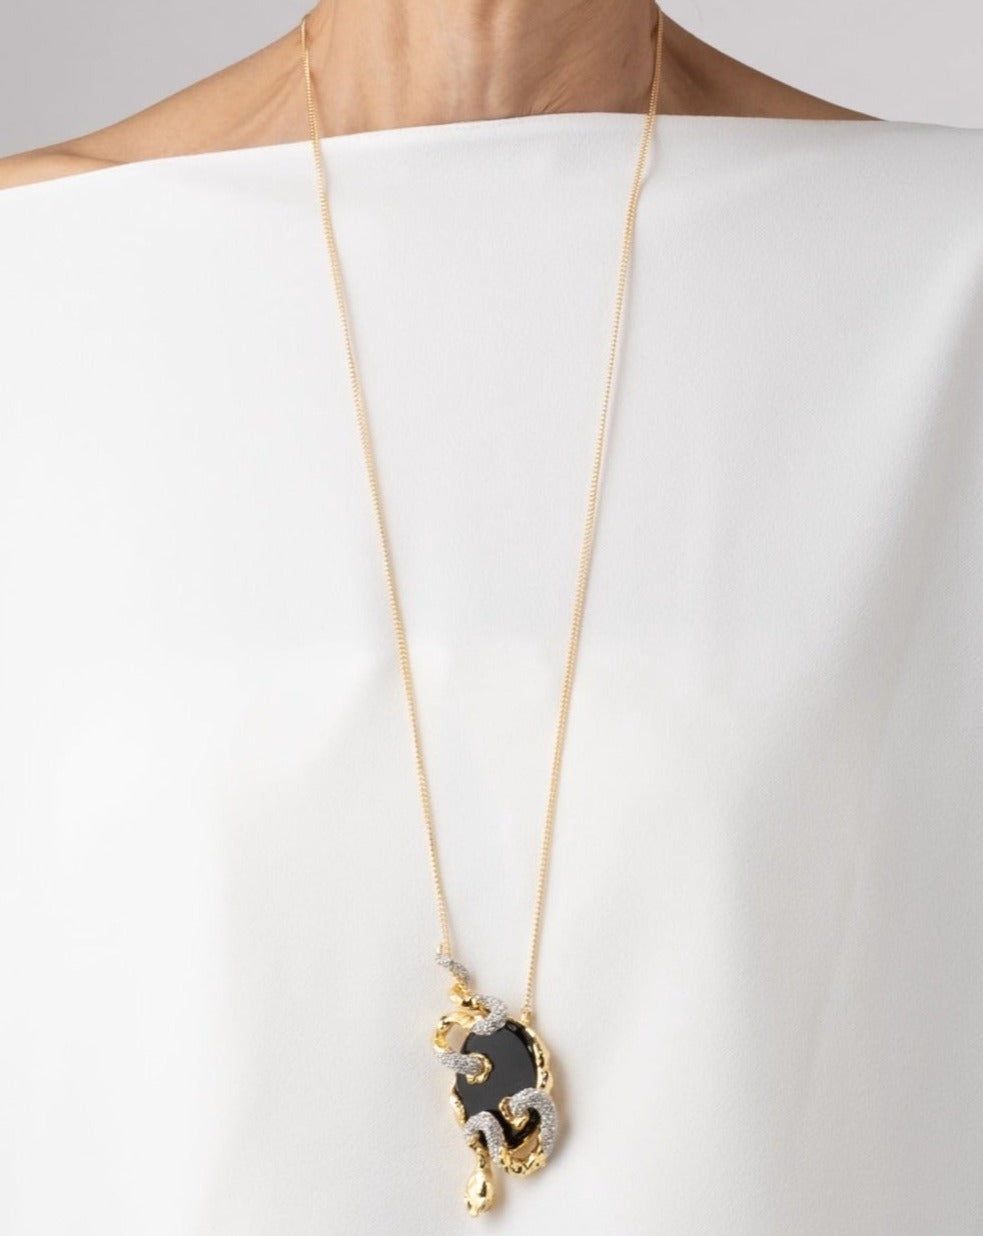 Crystal Pave Serpent Onyx Necklace - Photo 2